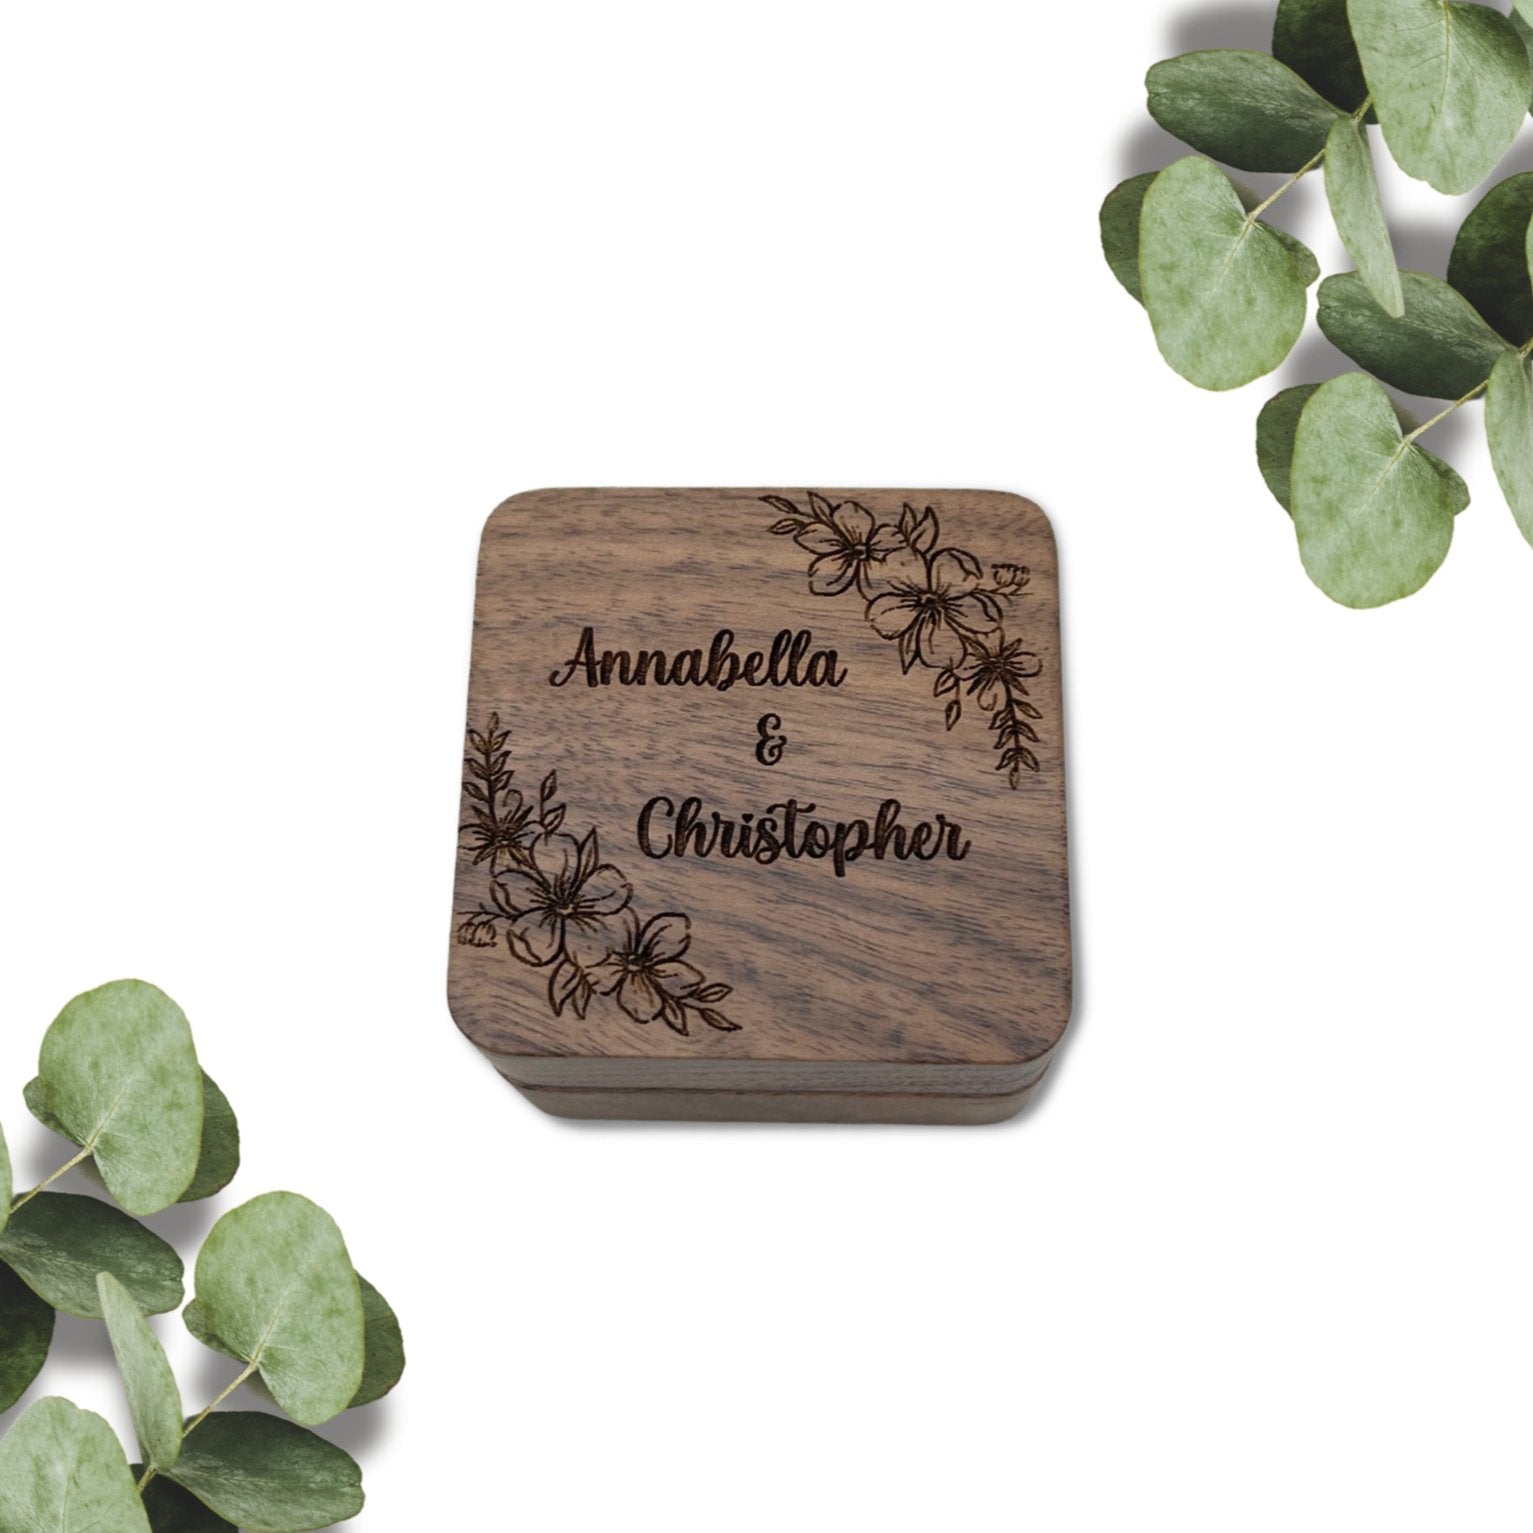 Personalised Double Slot Wooden Ring Box.  This rustic ring box is perfect for you and your soon to be.   Personalise your ring box with two names of your choice. (max characters per name is 15)  Size - Size: 5.5*5.5*4 cm